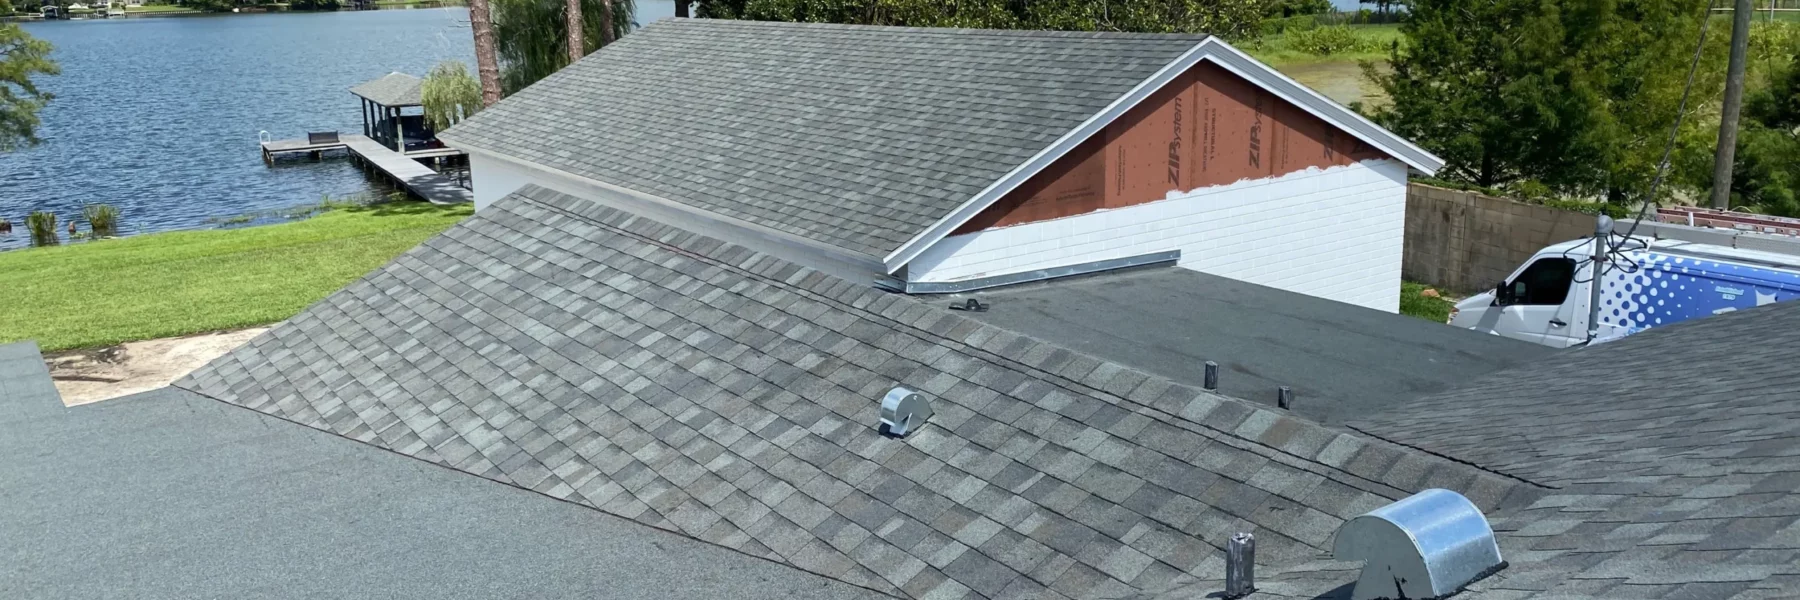 Expert Roof Repair Services, Protect Your Home and Wallet